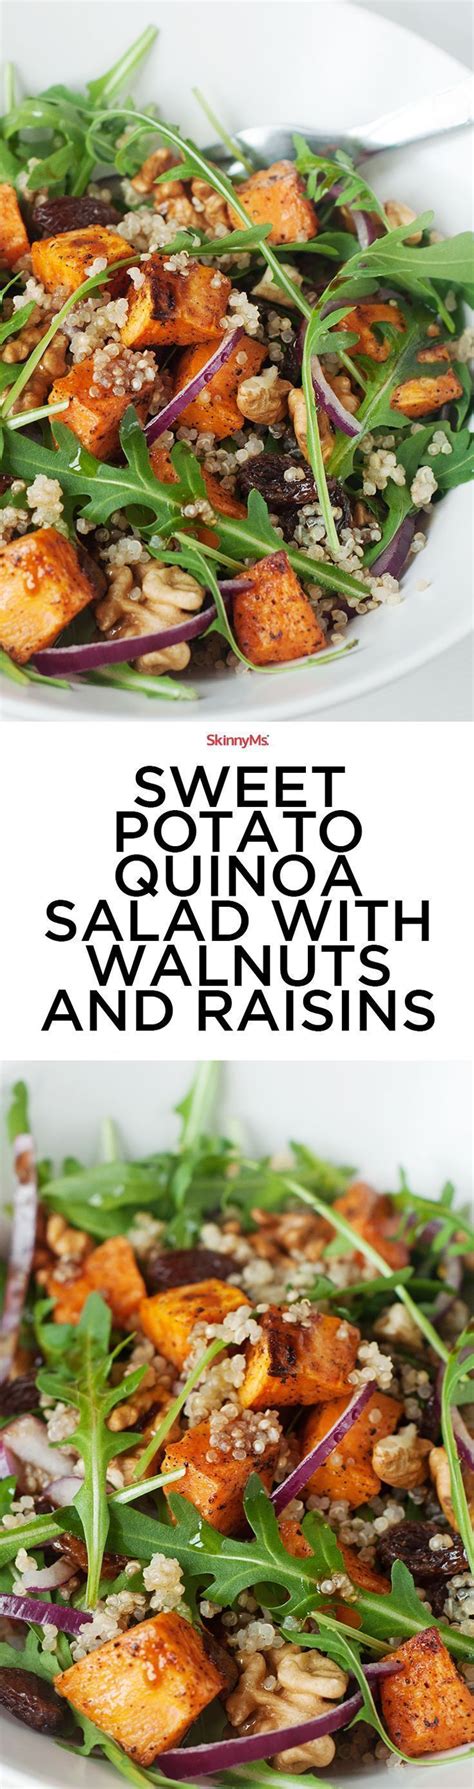 Add potatoes to bowl with dressing and toss until well coated. Sweet Potato Quinoa Salad with Walnuts and Raisins | Recipe | Sweet potato quinoa salad ...